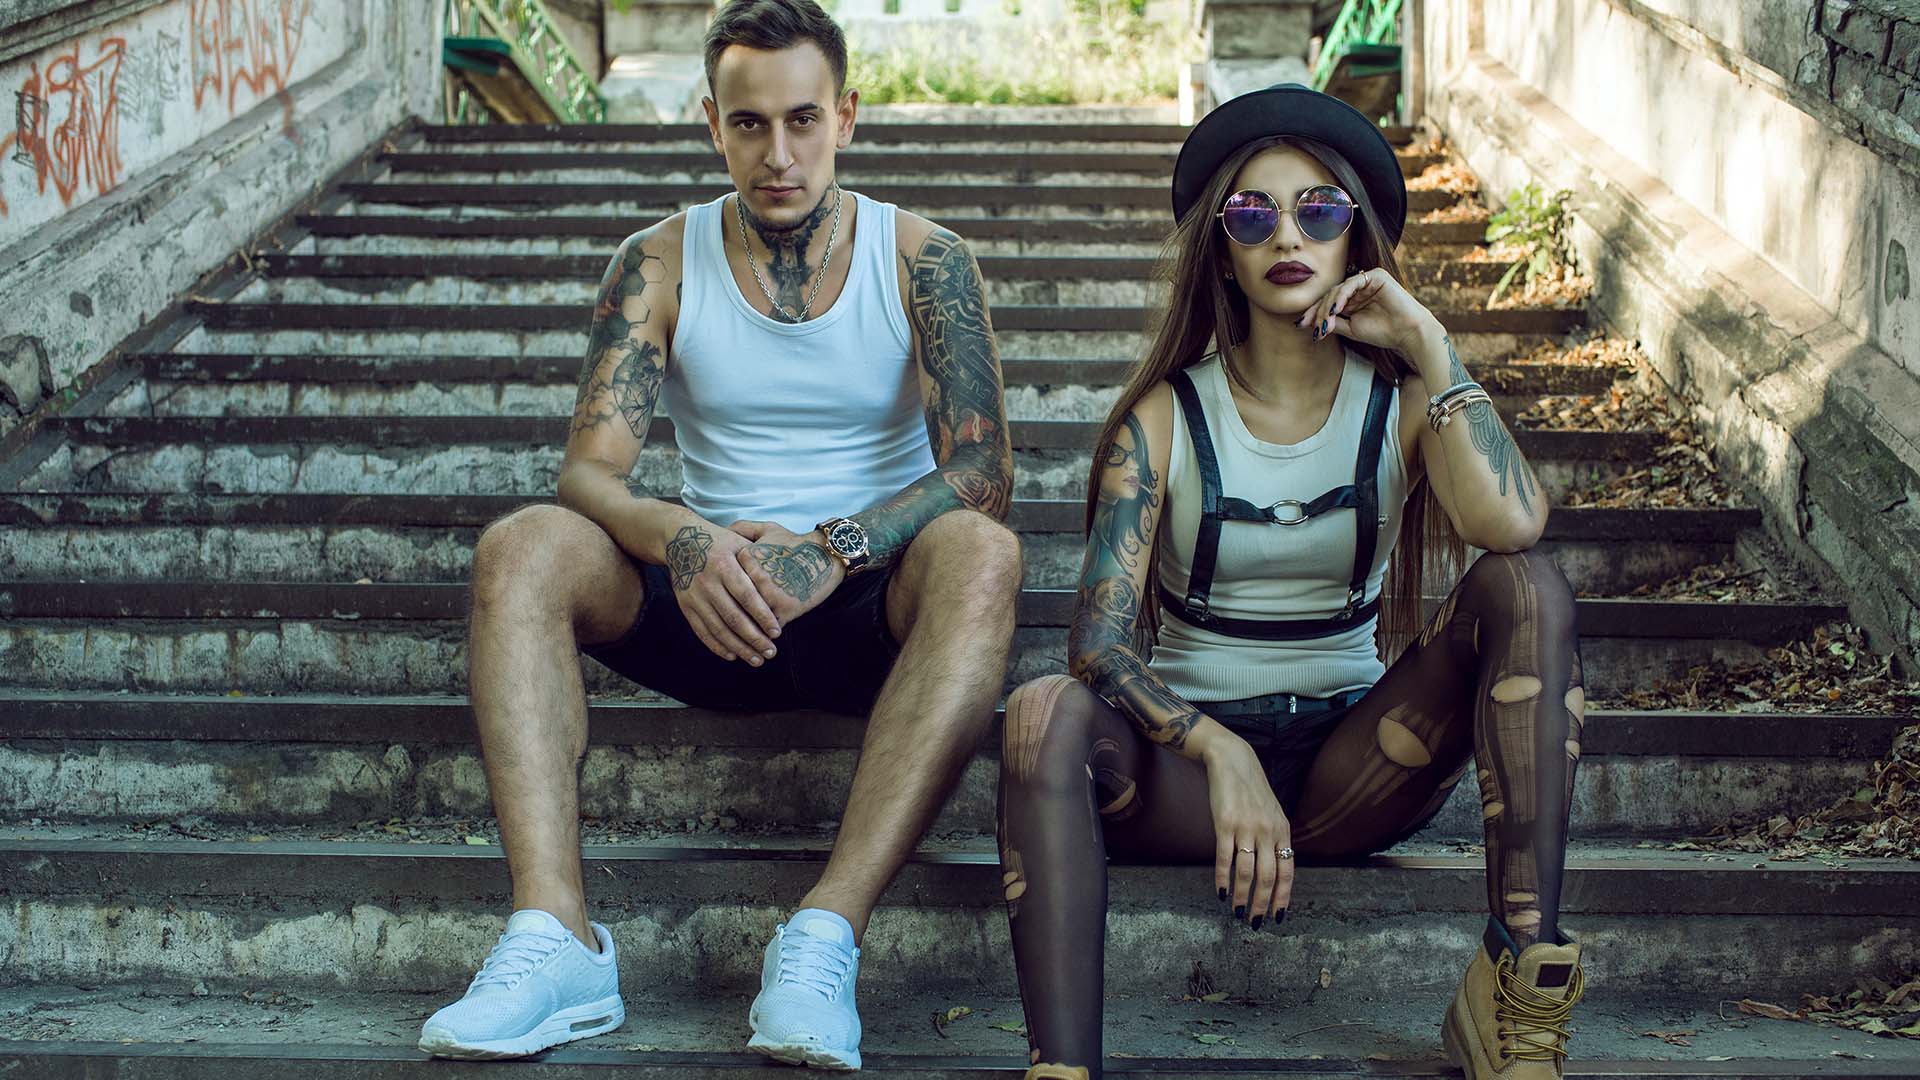 Man and woman sitting on stairs in public with multiple tattoos on their body. The woman is wearing ripped pantyhose.